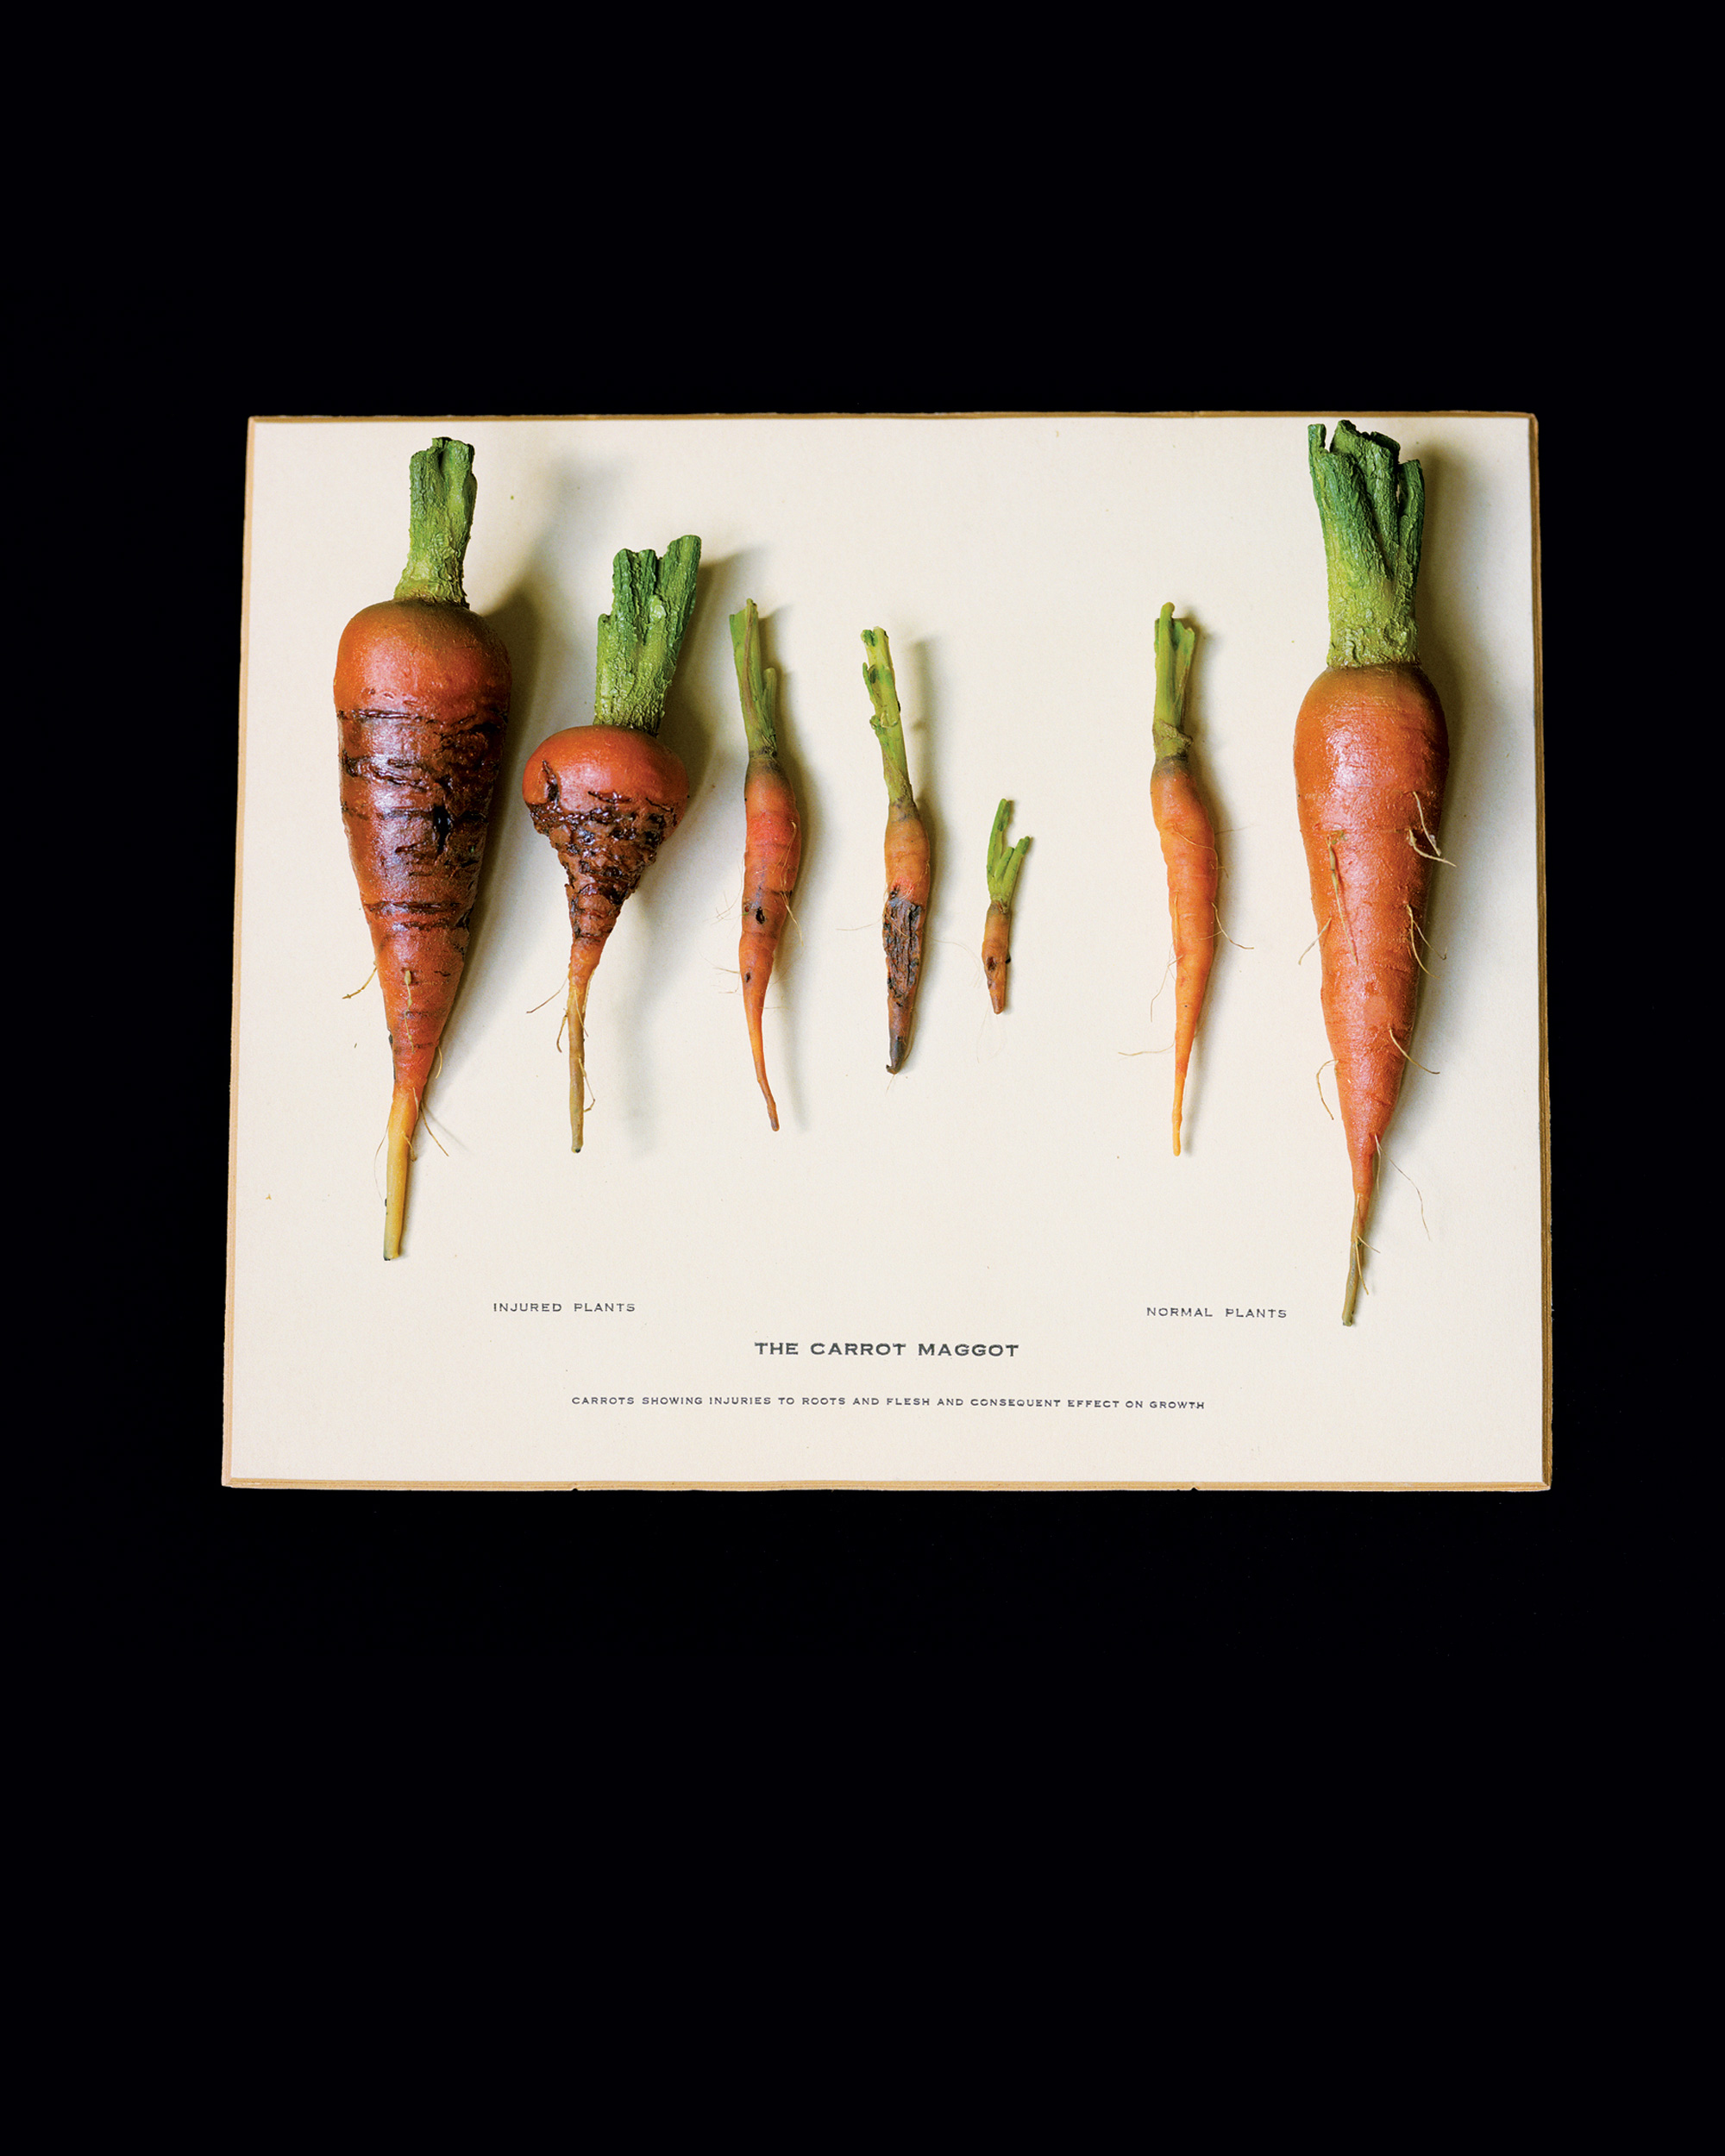 A two thousand and nine wax agricultural models of carrots titled “The Carrot Maggot.”